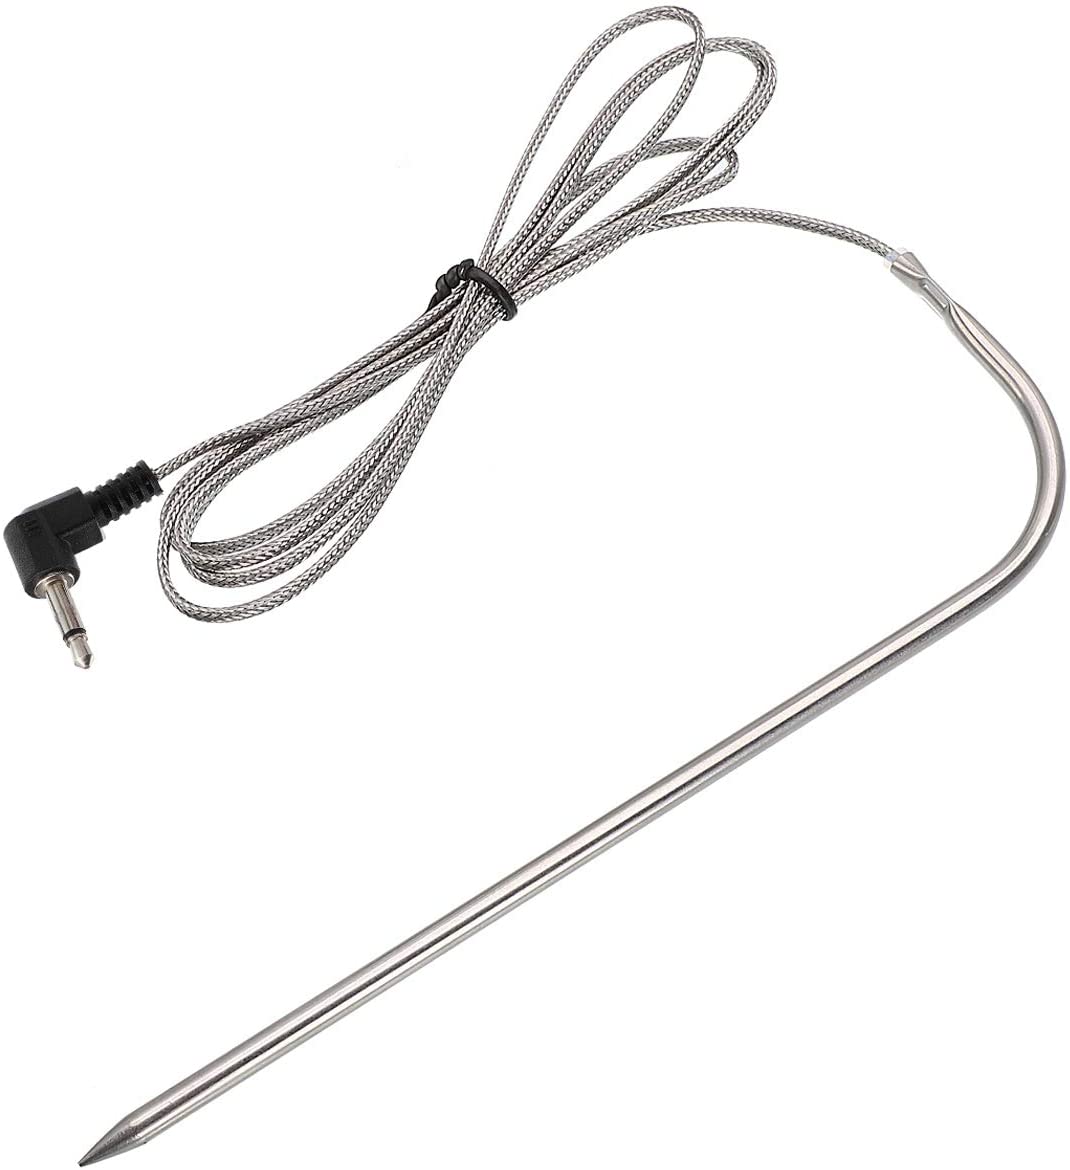 Waterproof Meat Probe - Compatible With Traeger & Pit Boss Bbq Grills -  Digital Thermostat Probes With Plug - Temu